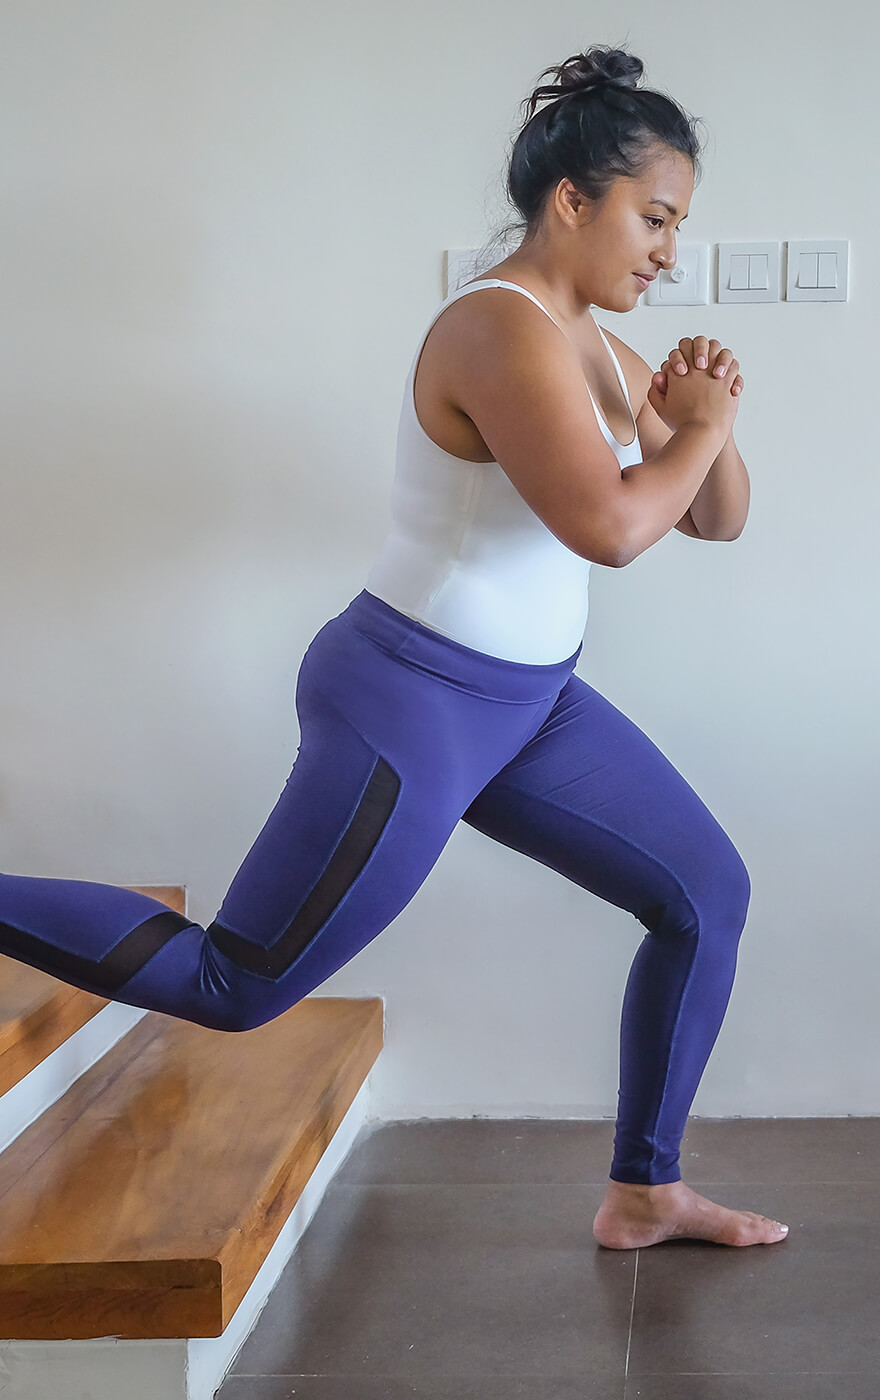 5 stair exercises to do at home